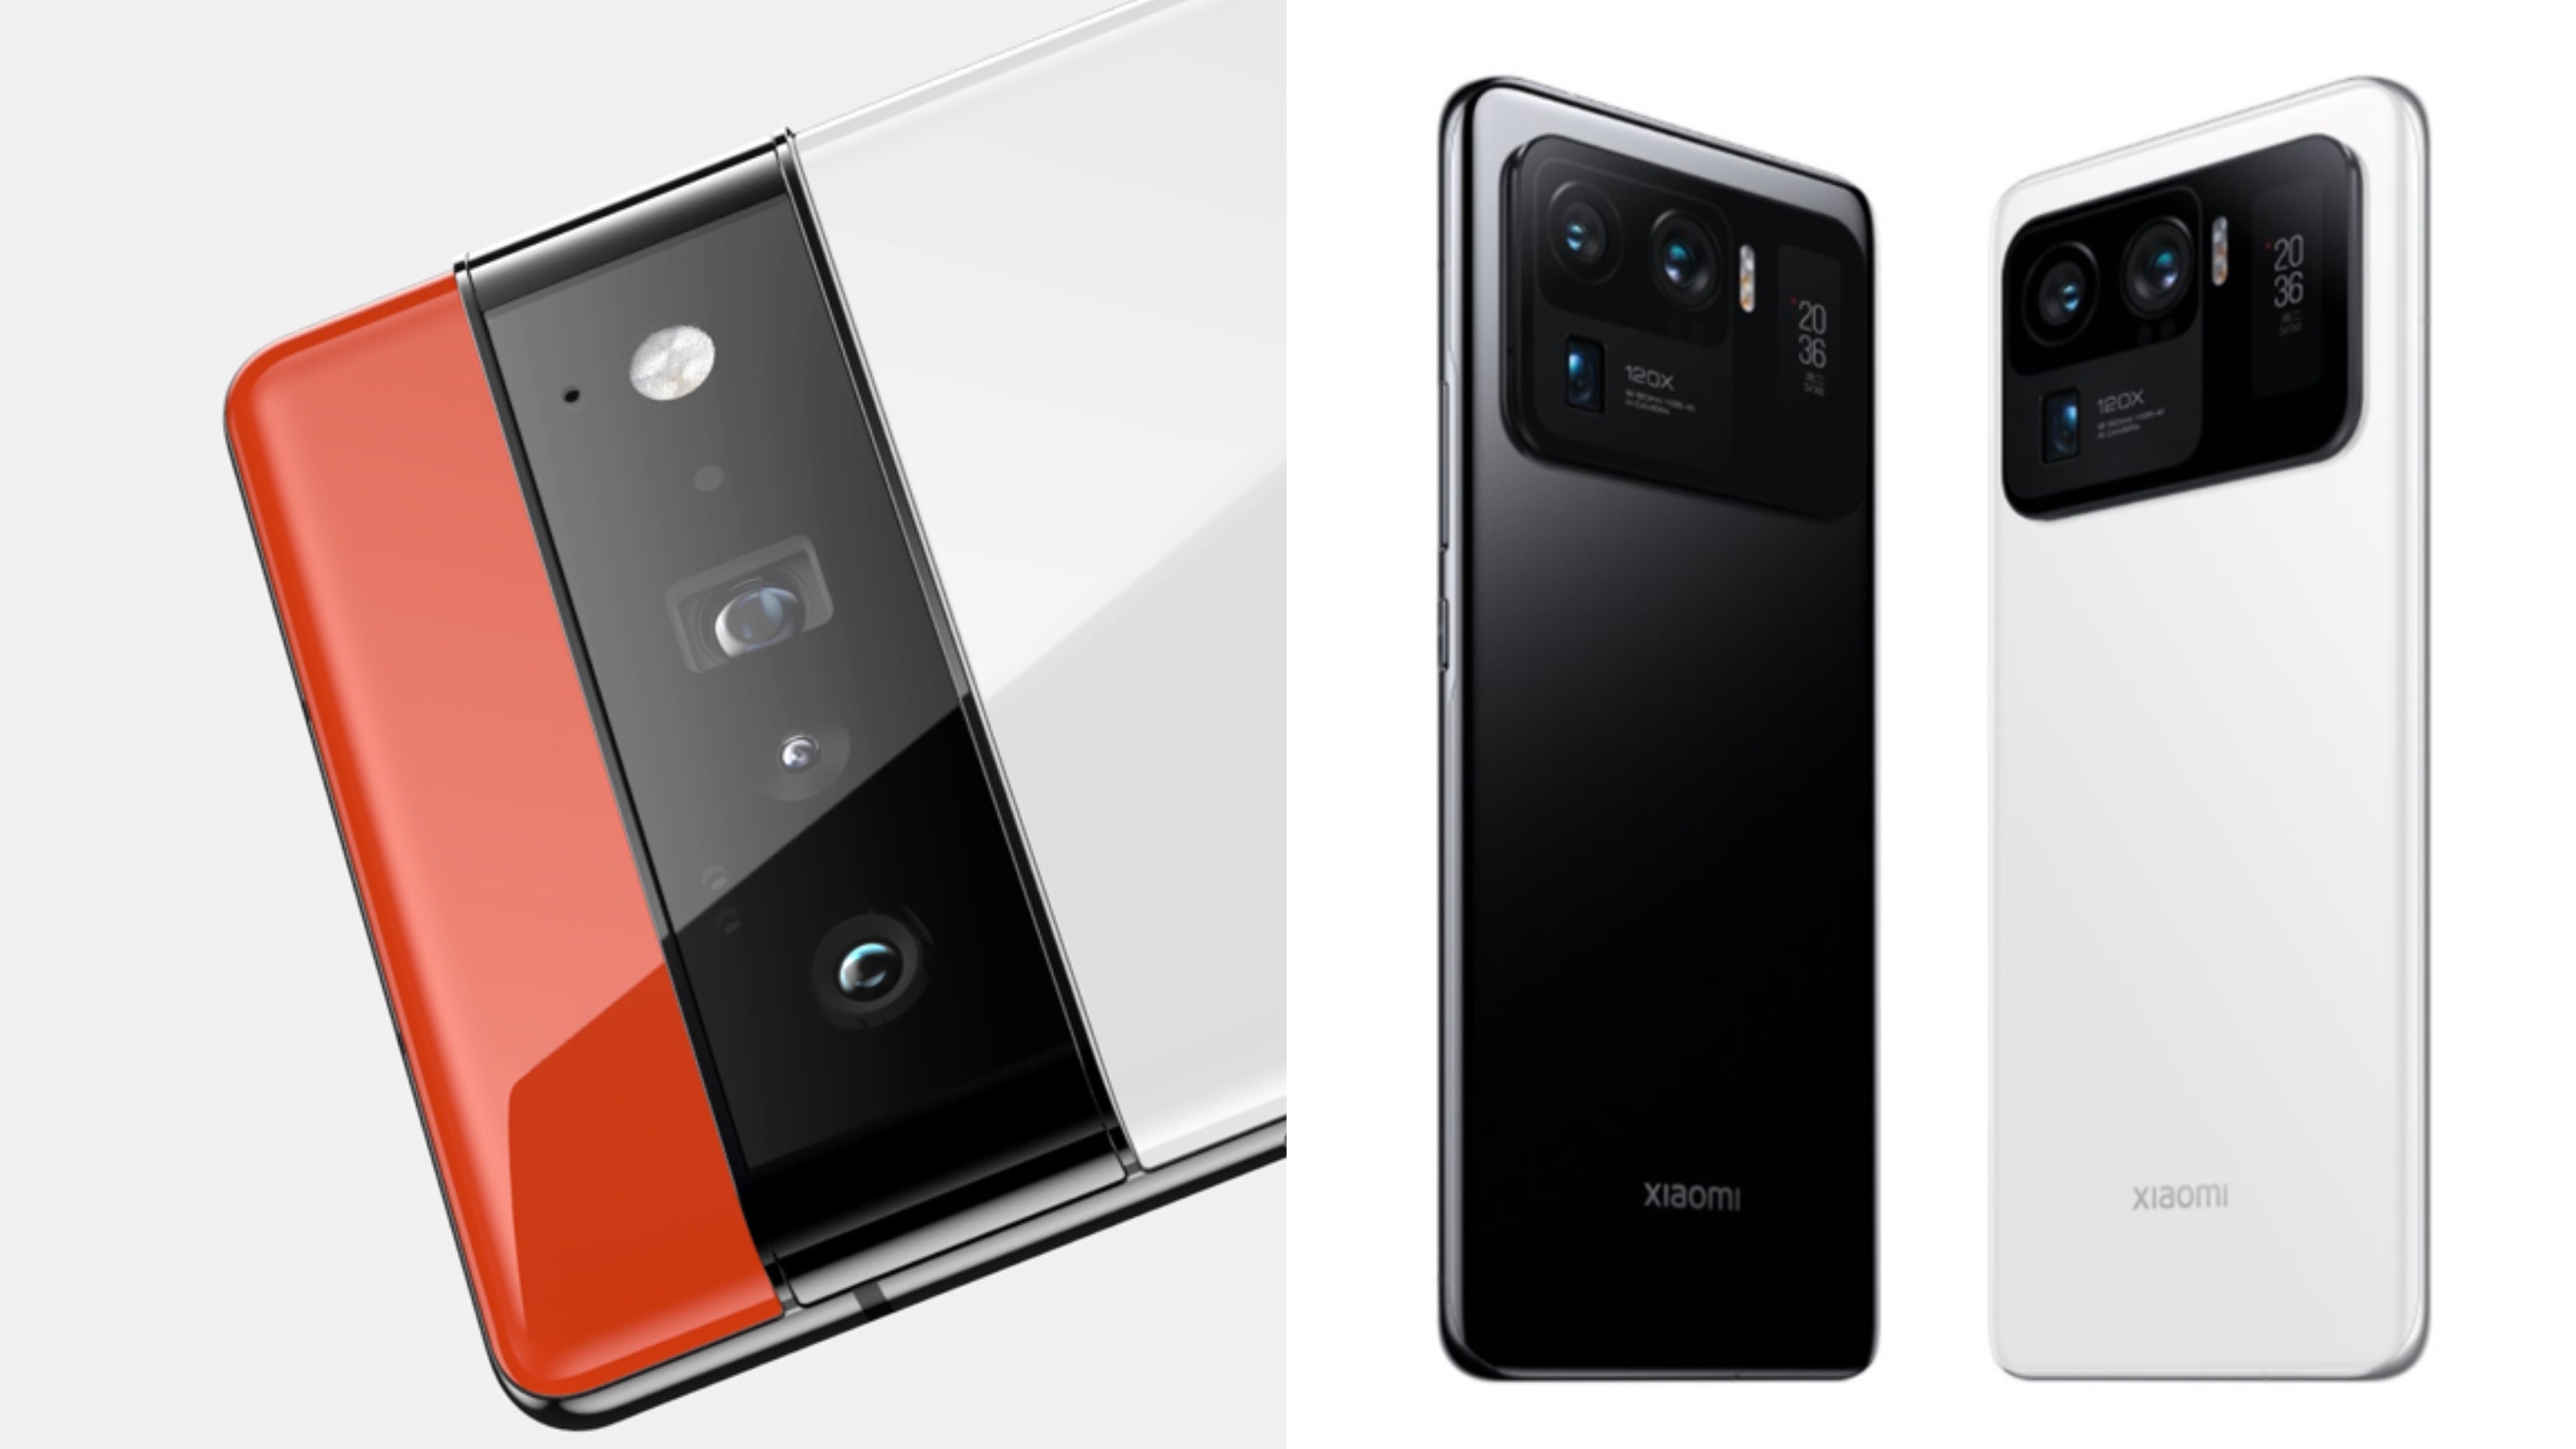 The Xiaomi Mi 11 Ultra (right) is the smartphone with the largest camera sensor, if we don&#039;t count Sharp&#039;s Aquos R6, which is only available in Japan. - Google Pixel 6 Pro and its 122MP camera system: The 4-year wait for 4 new cameras